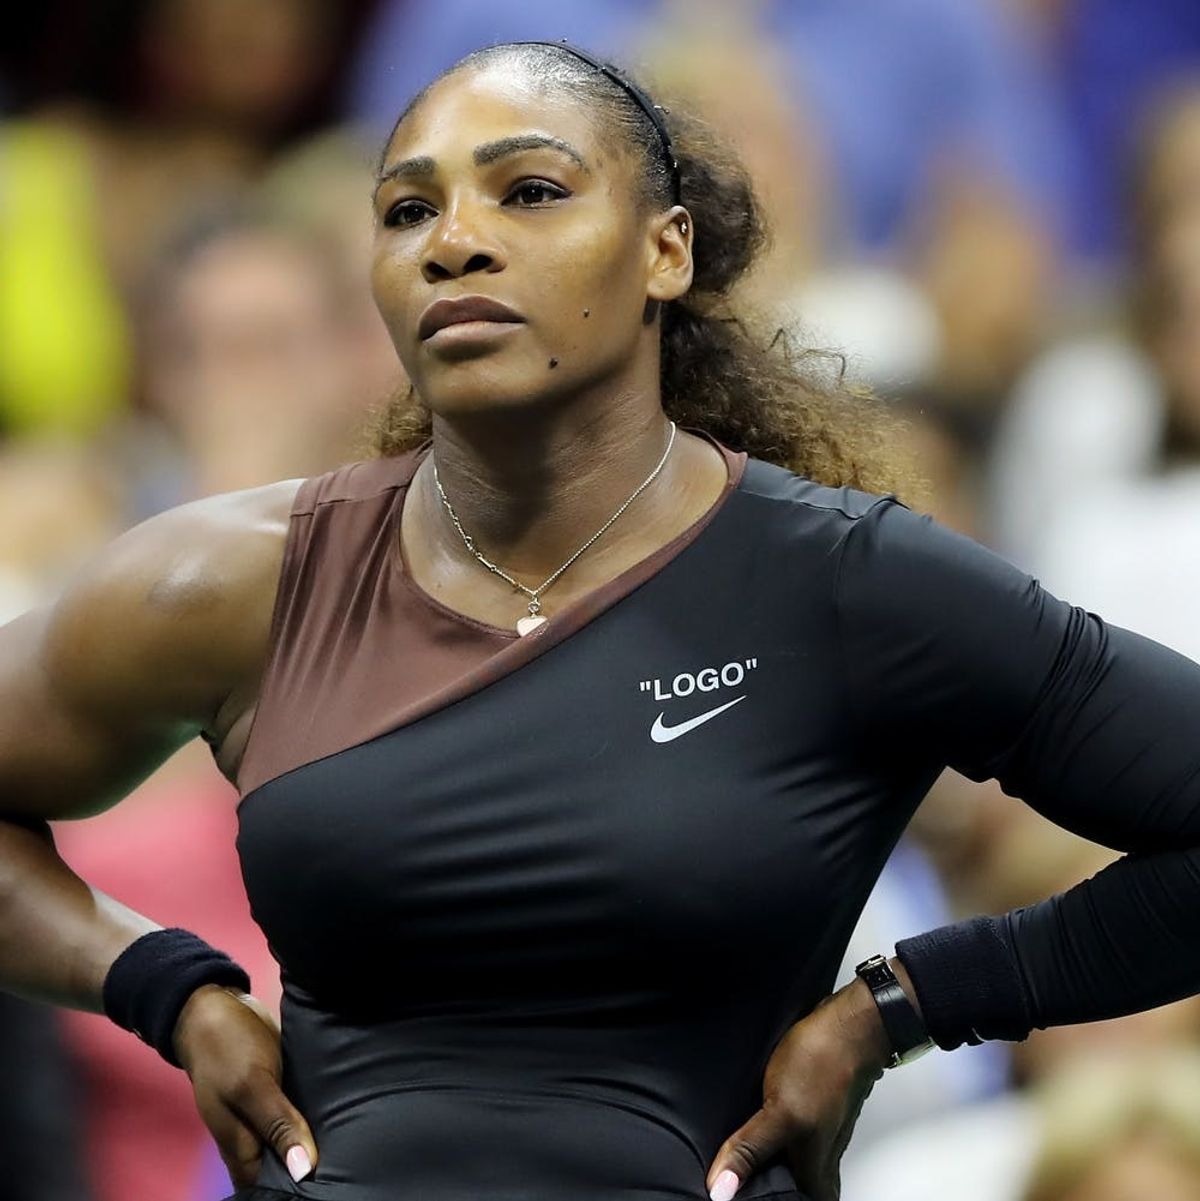 Male Tennis Stars Support Serena Williams by Admitting They’ve Said Worse Things and Not Been Penalized